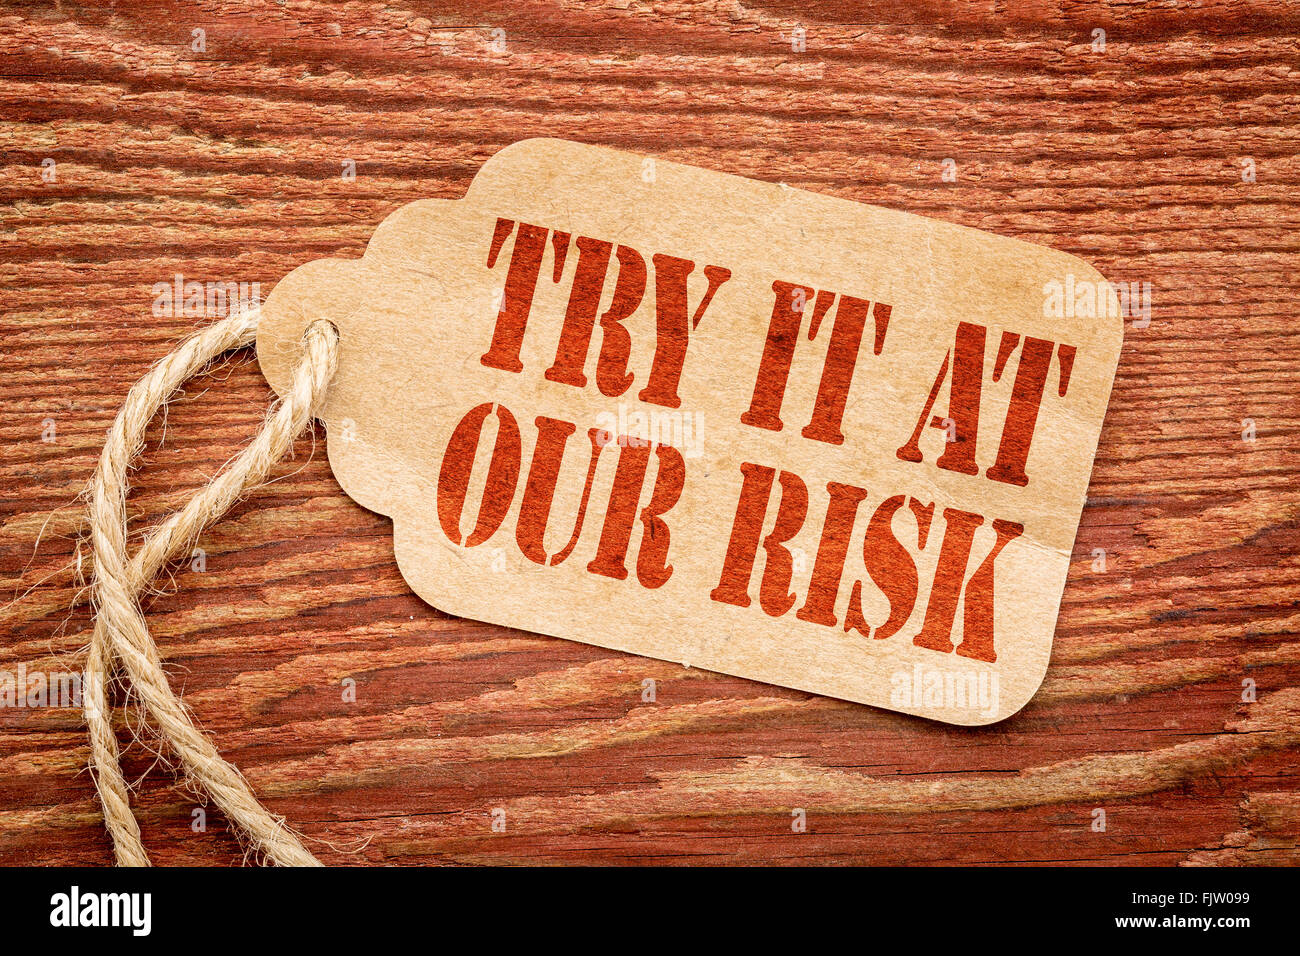 Try it at our risk - red stencil text on a paper price tag against rustic wood Stock Photo